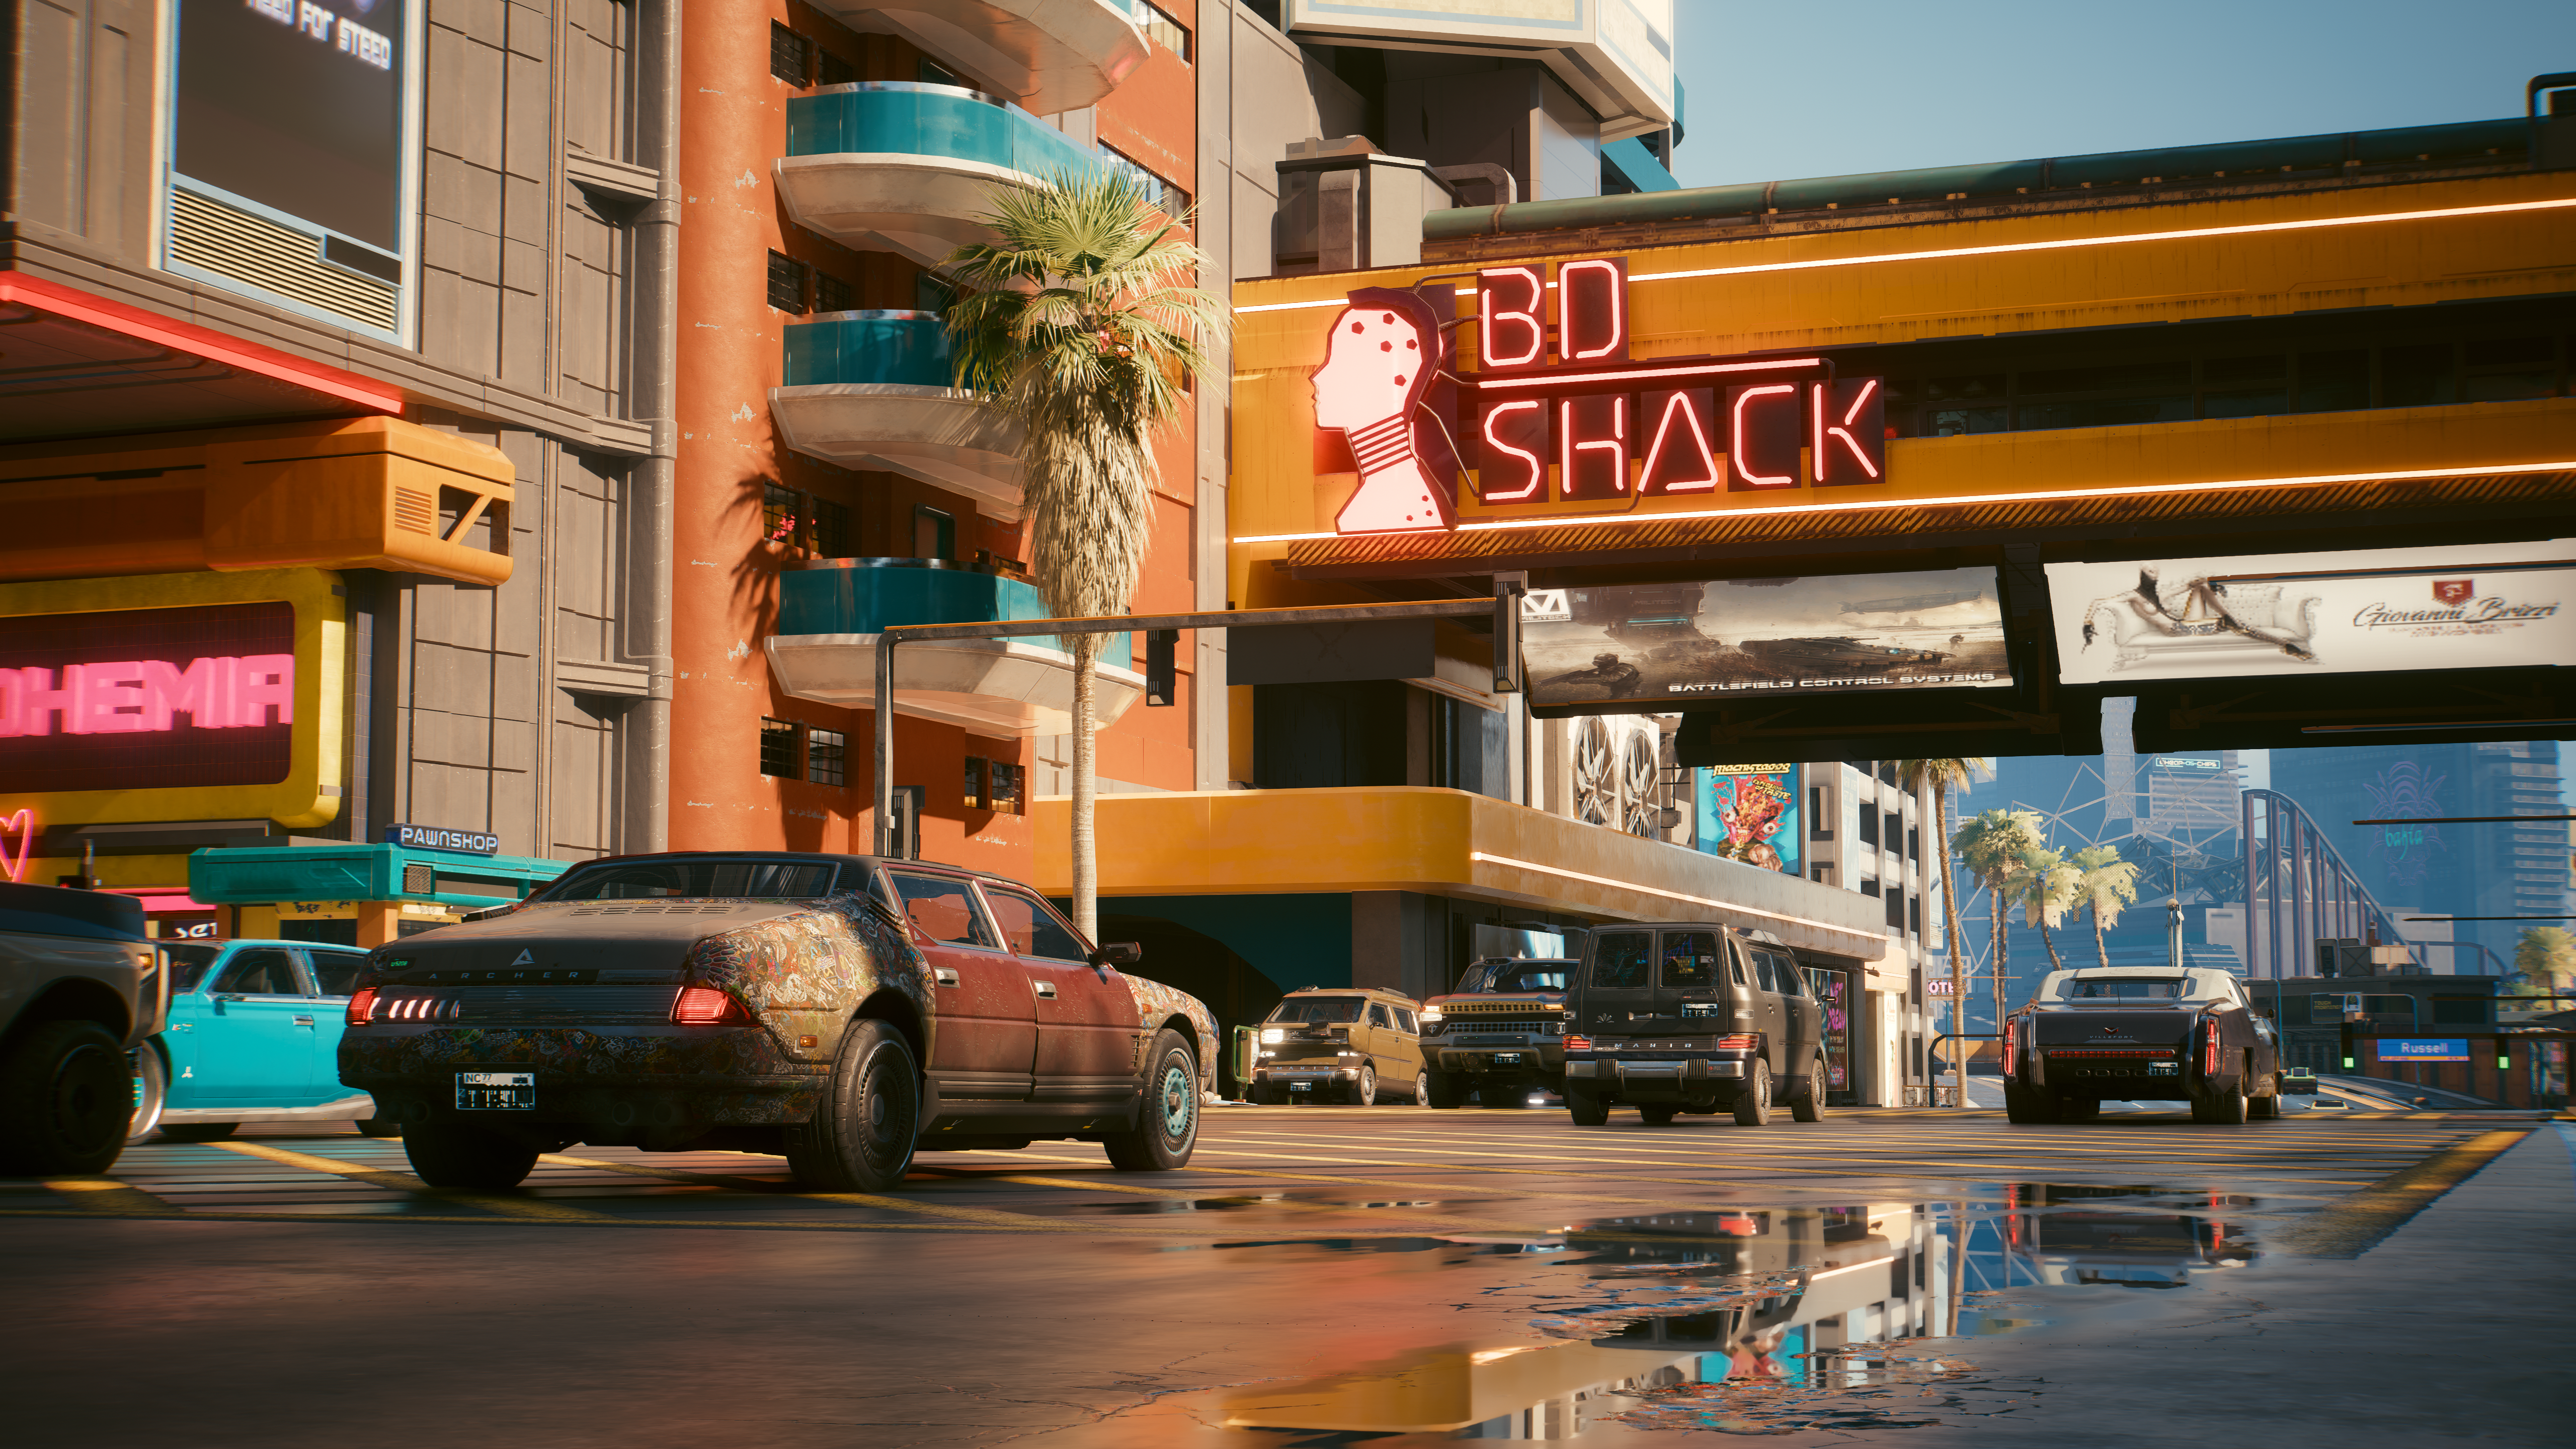 General 5120x2880 Cyberpunk 2077 video games Nvidia RTX path tracing car reflection neon signs CGI road building